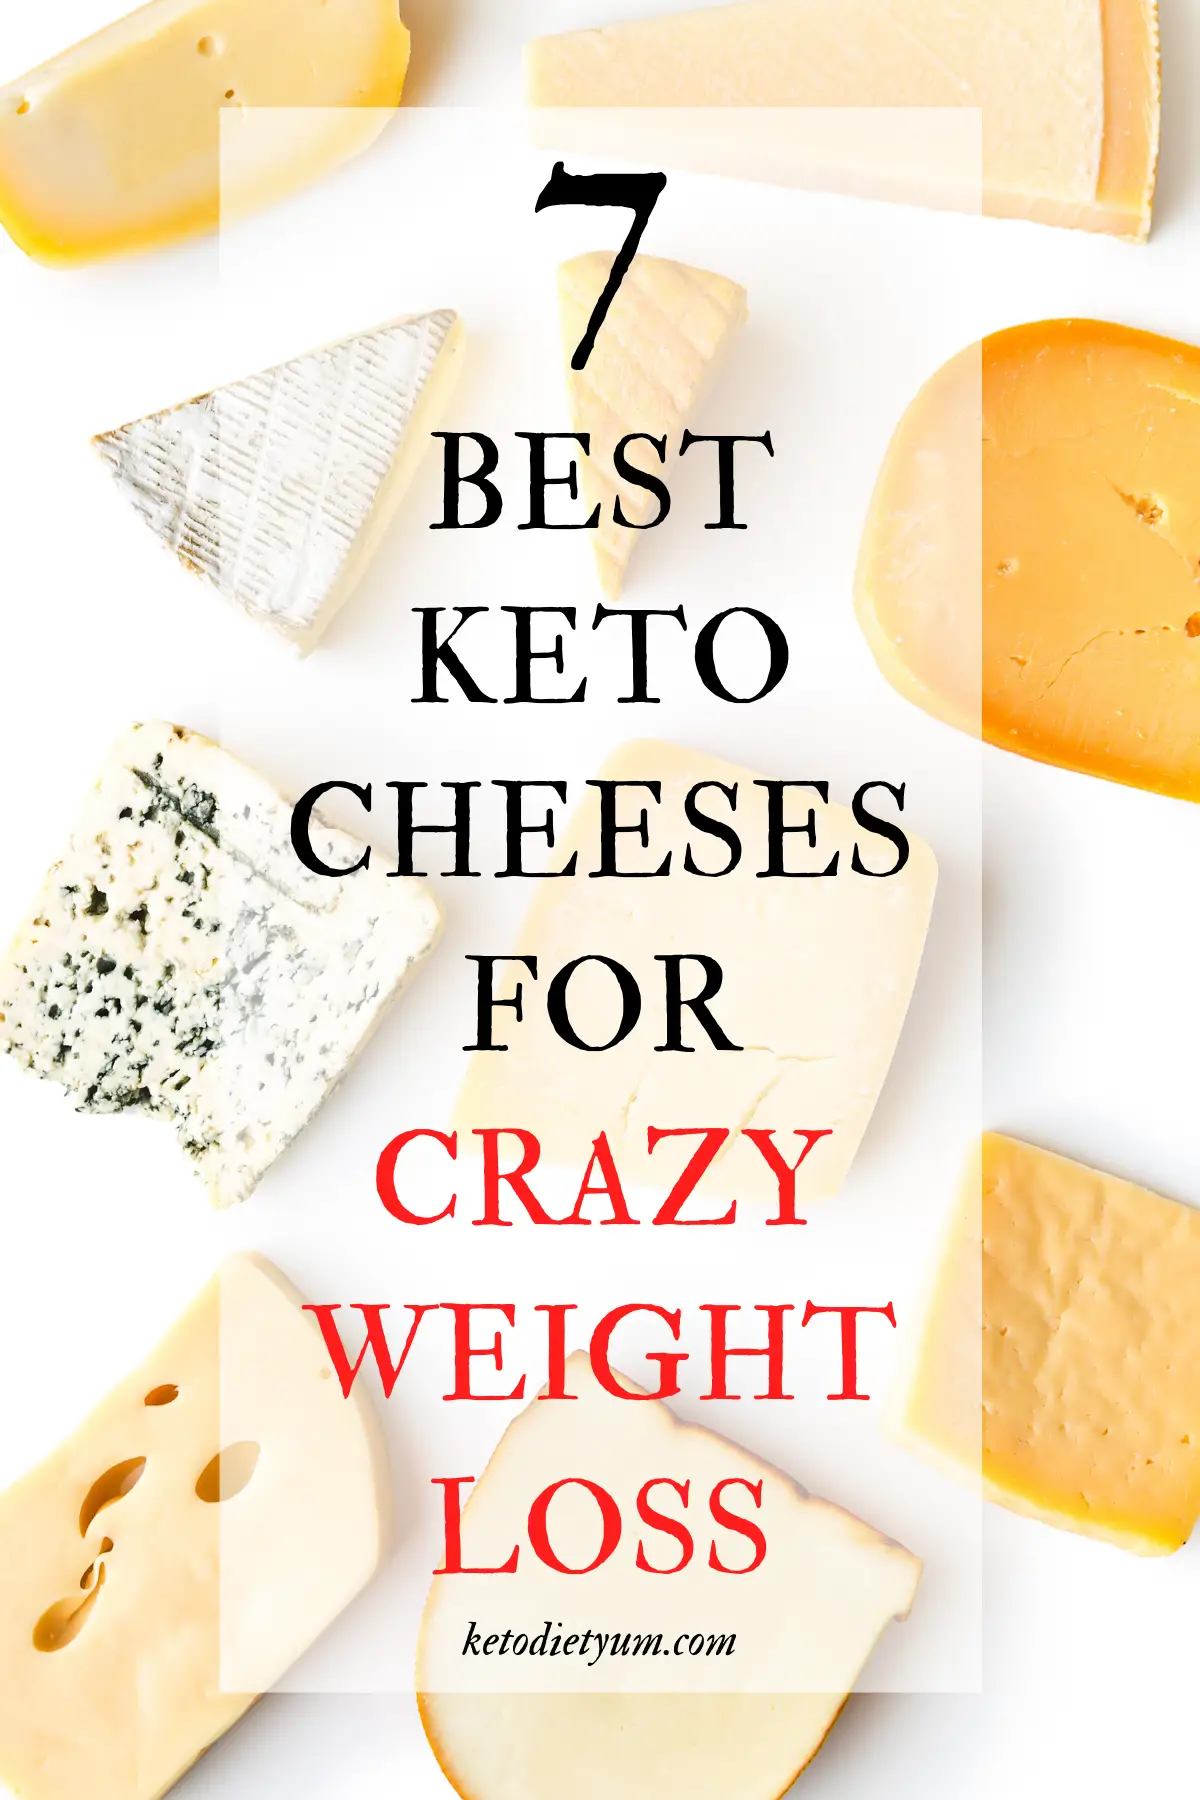 Keto Cheese: 7 Best Types and 2 Worst Types for the Keto Diet in 2020 ...